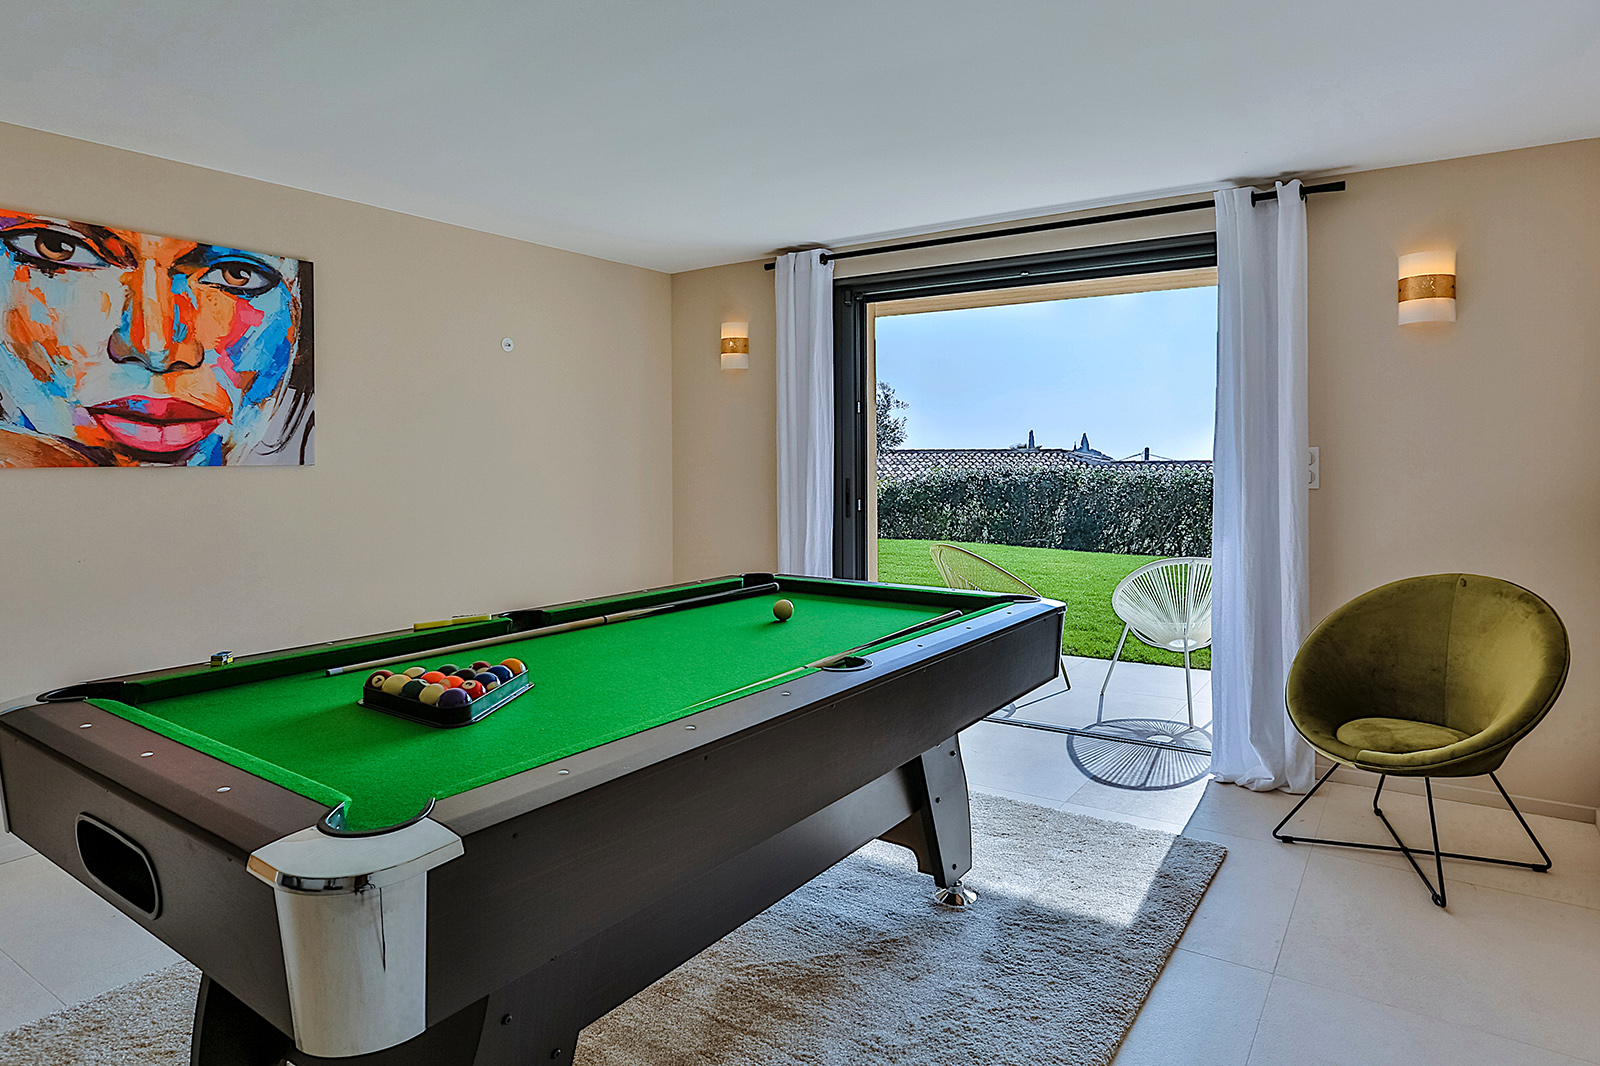 Play room with billiards